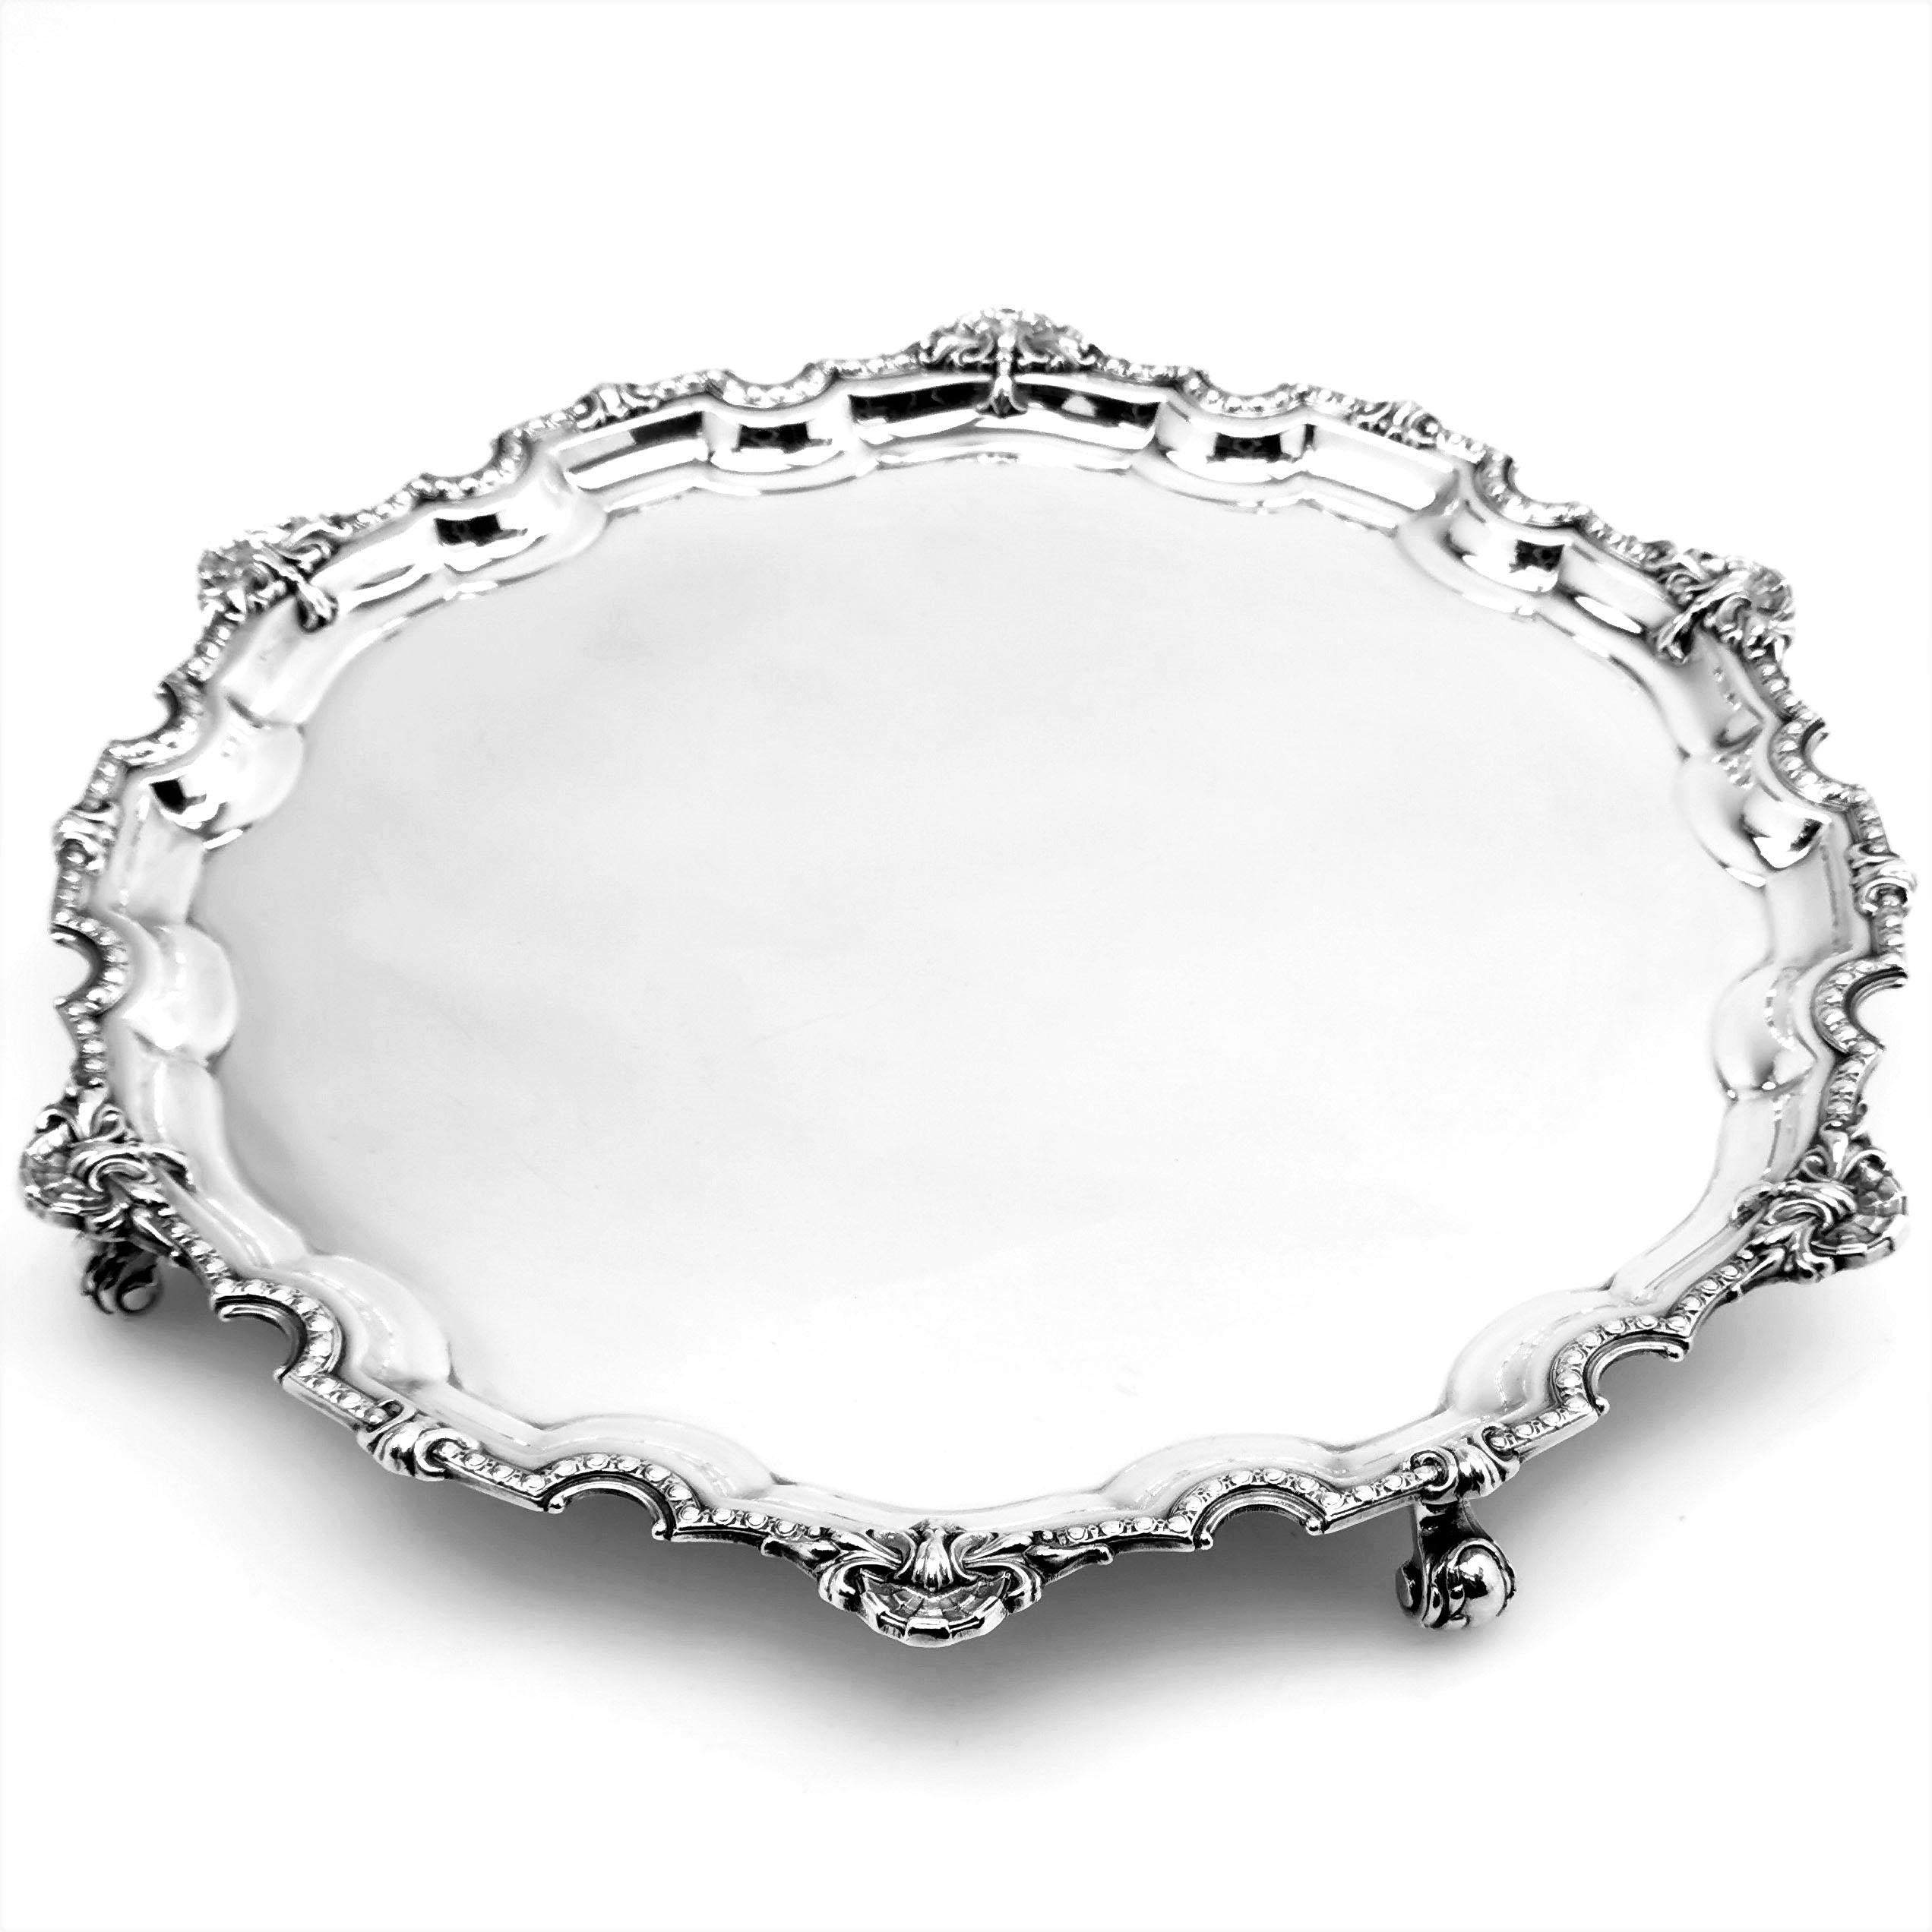 English Sterling Silver Salver / Tray / Platter 1966